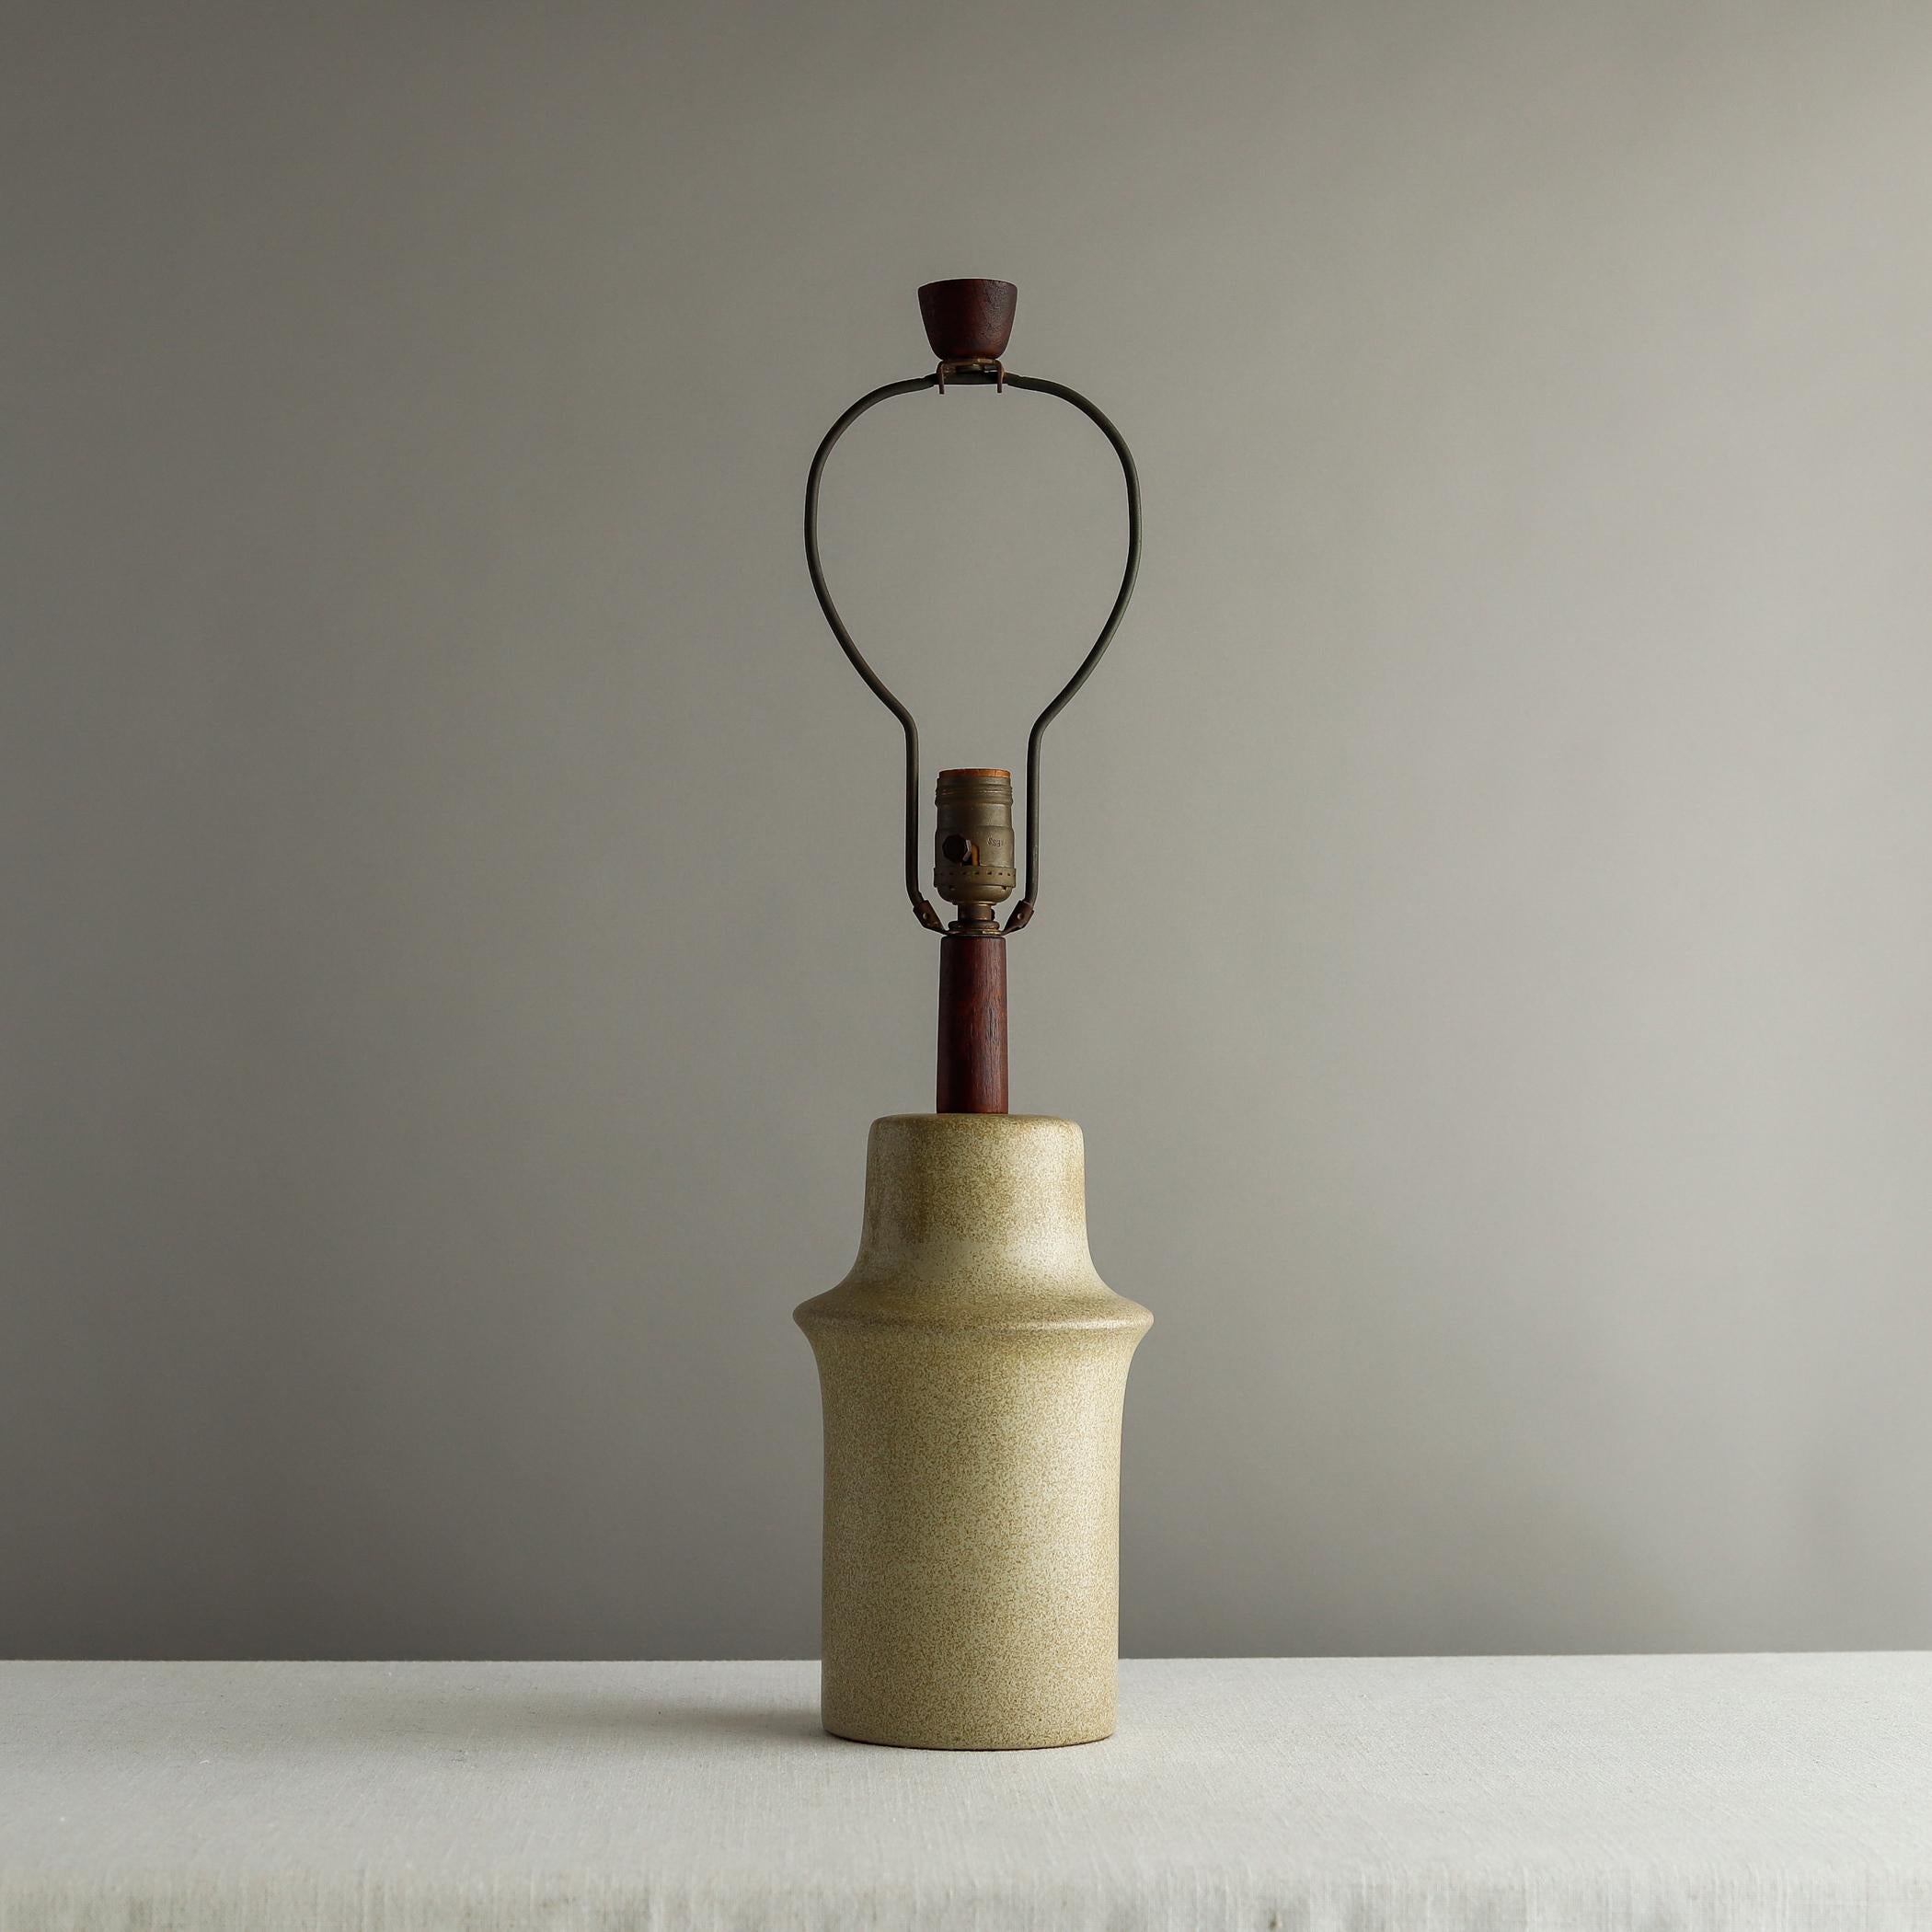 Midcentury ceramic table lamp designed by Jane and Gordon Martz for Marshall Studios of Indiana. The stoneware body is molded with protruding band near the top and has a speckled neutral glaze, mounted with a walnut neck and with original walnut